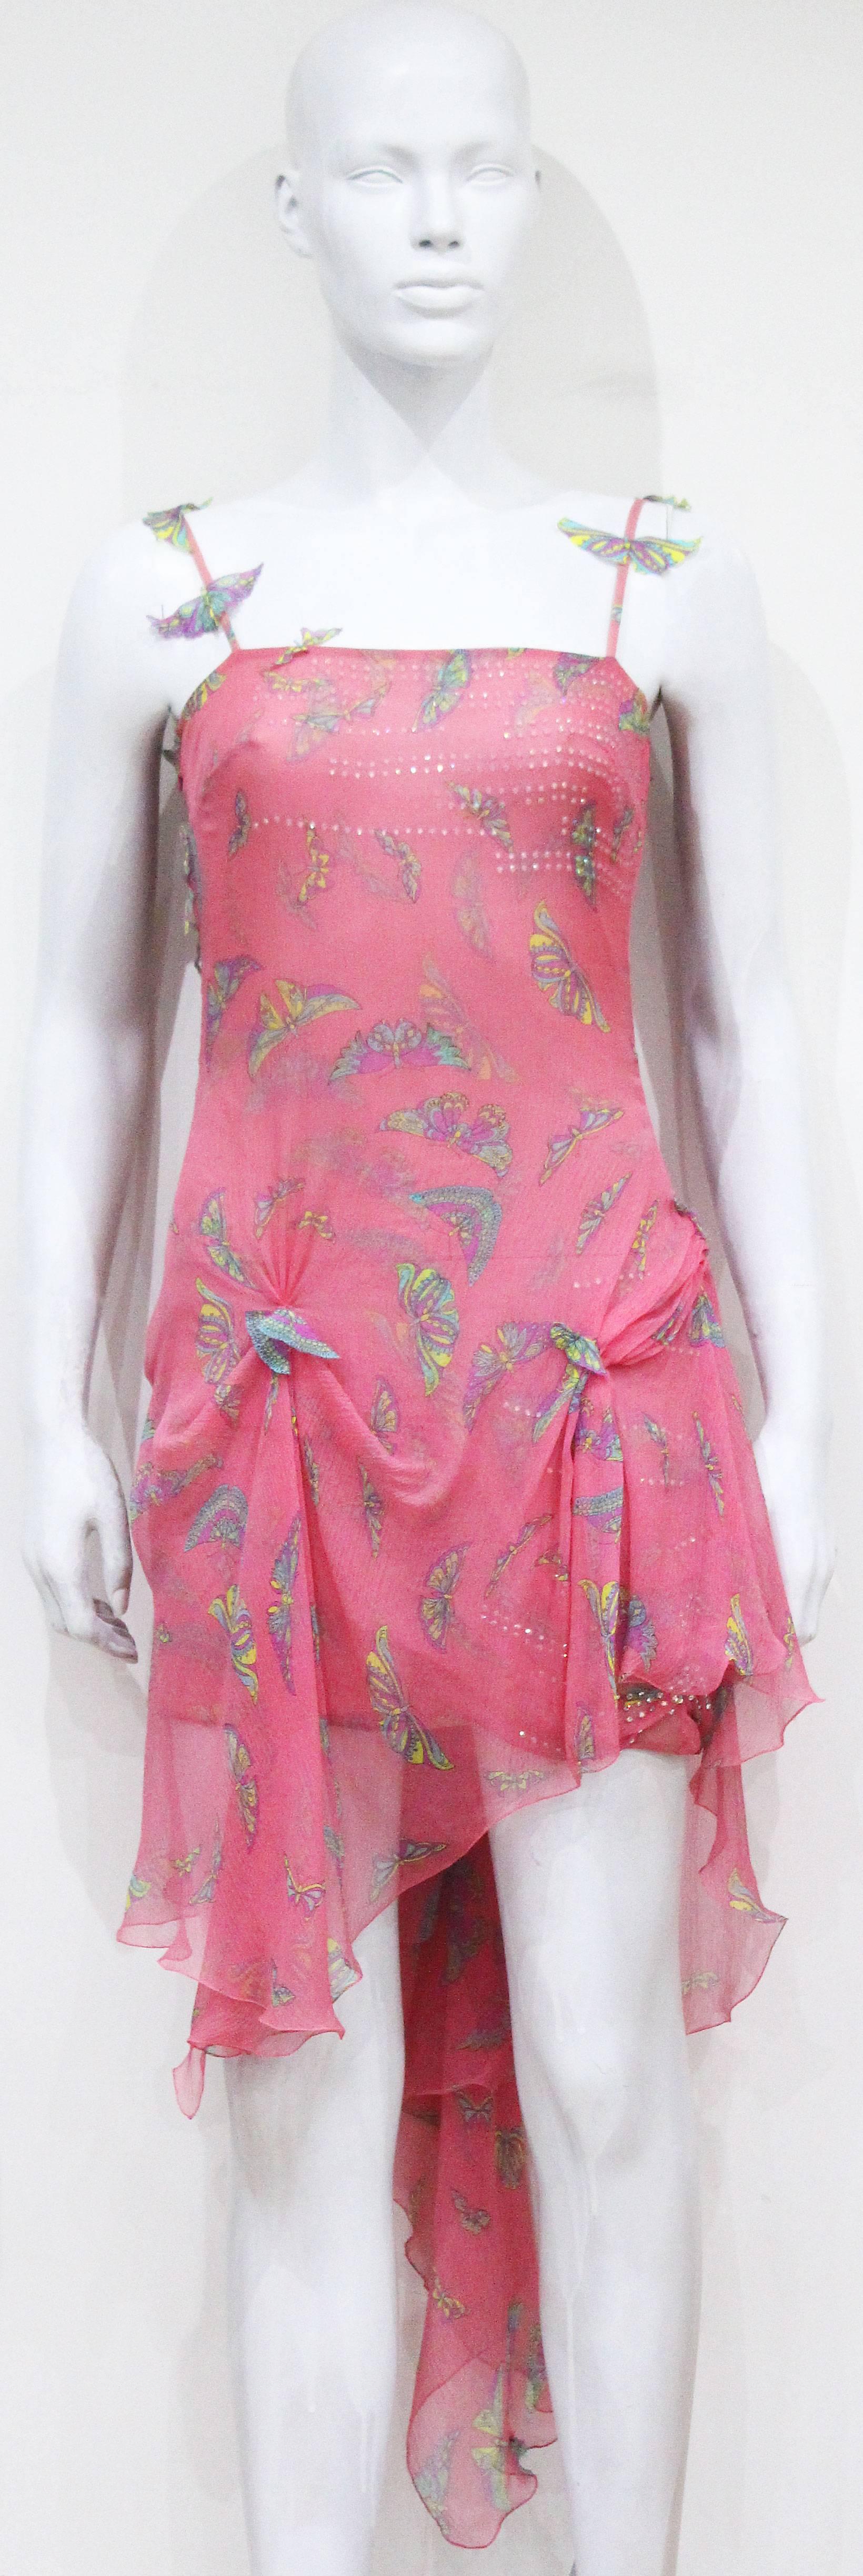 A Gianni Versace pink silk chiffon evening dress from the 1990s. The dress features 3-D cut out chiffon butterflies throughout, butterfly print with with pink base, diamante embellishment on bust and long train at rear. 

Fr 38 - It 42 